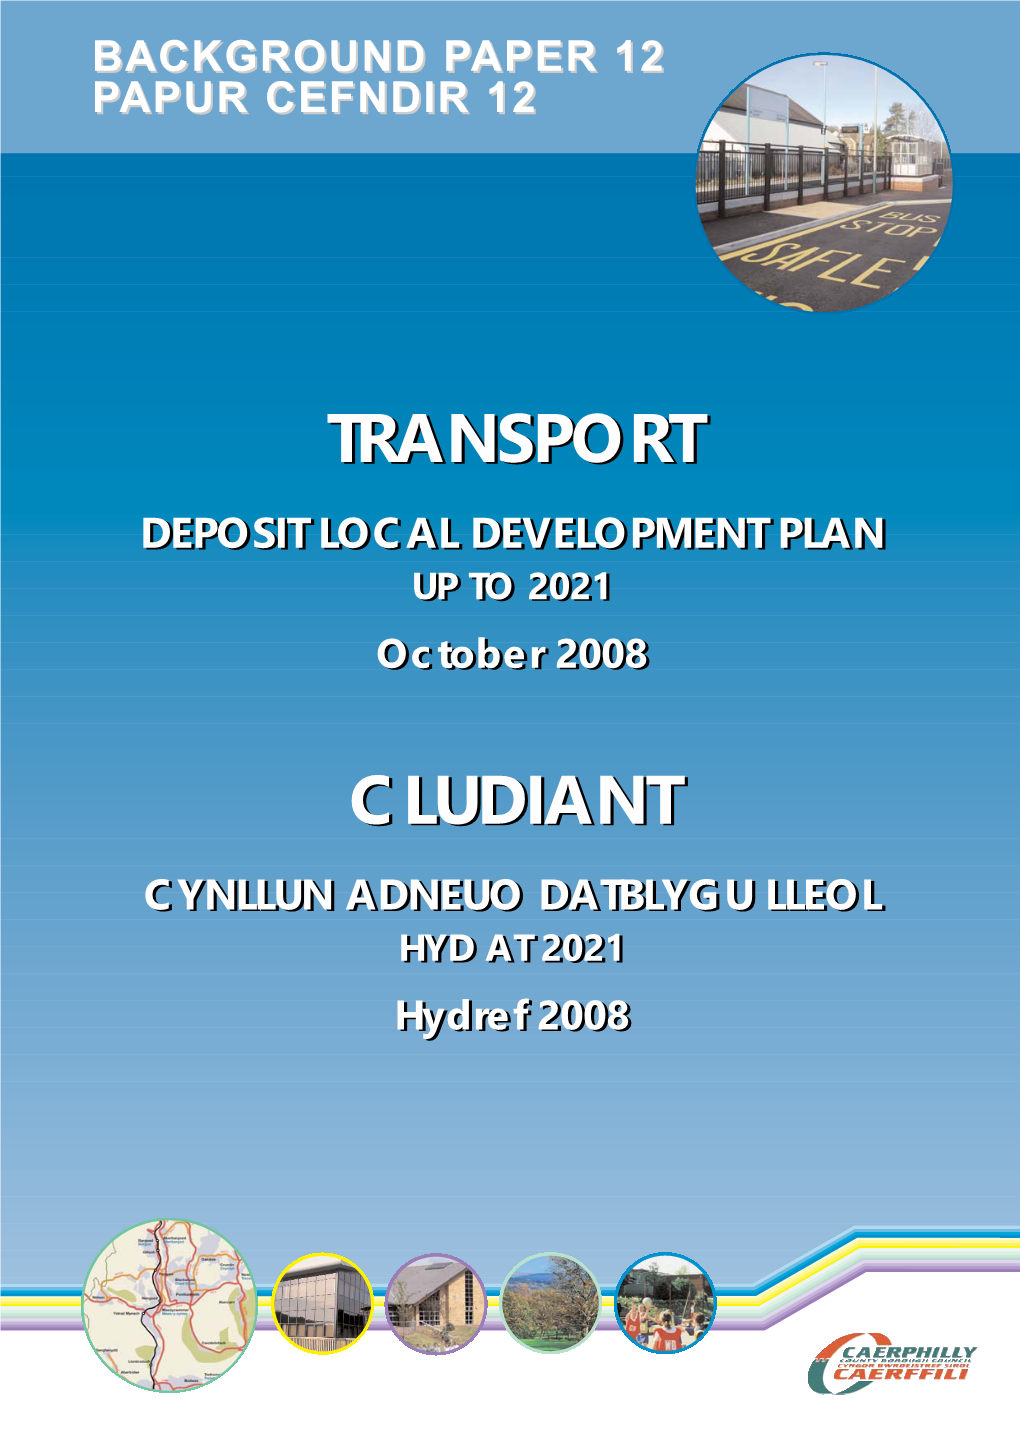 Transport Background.Qxp 03/10/2008 12:39 Page 1